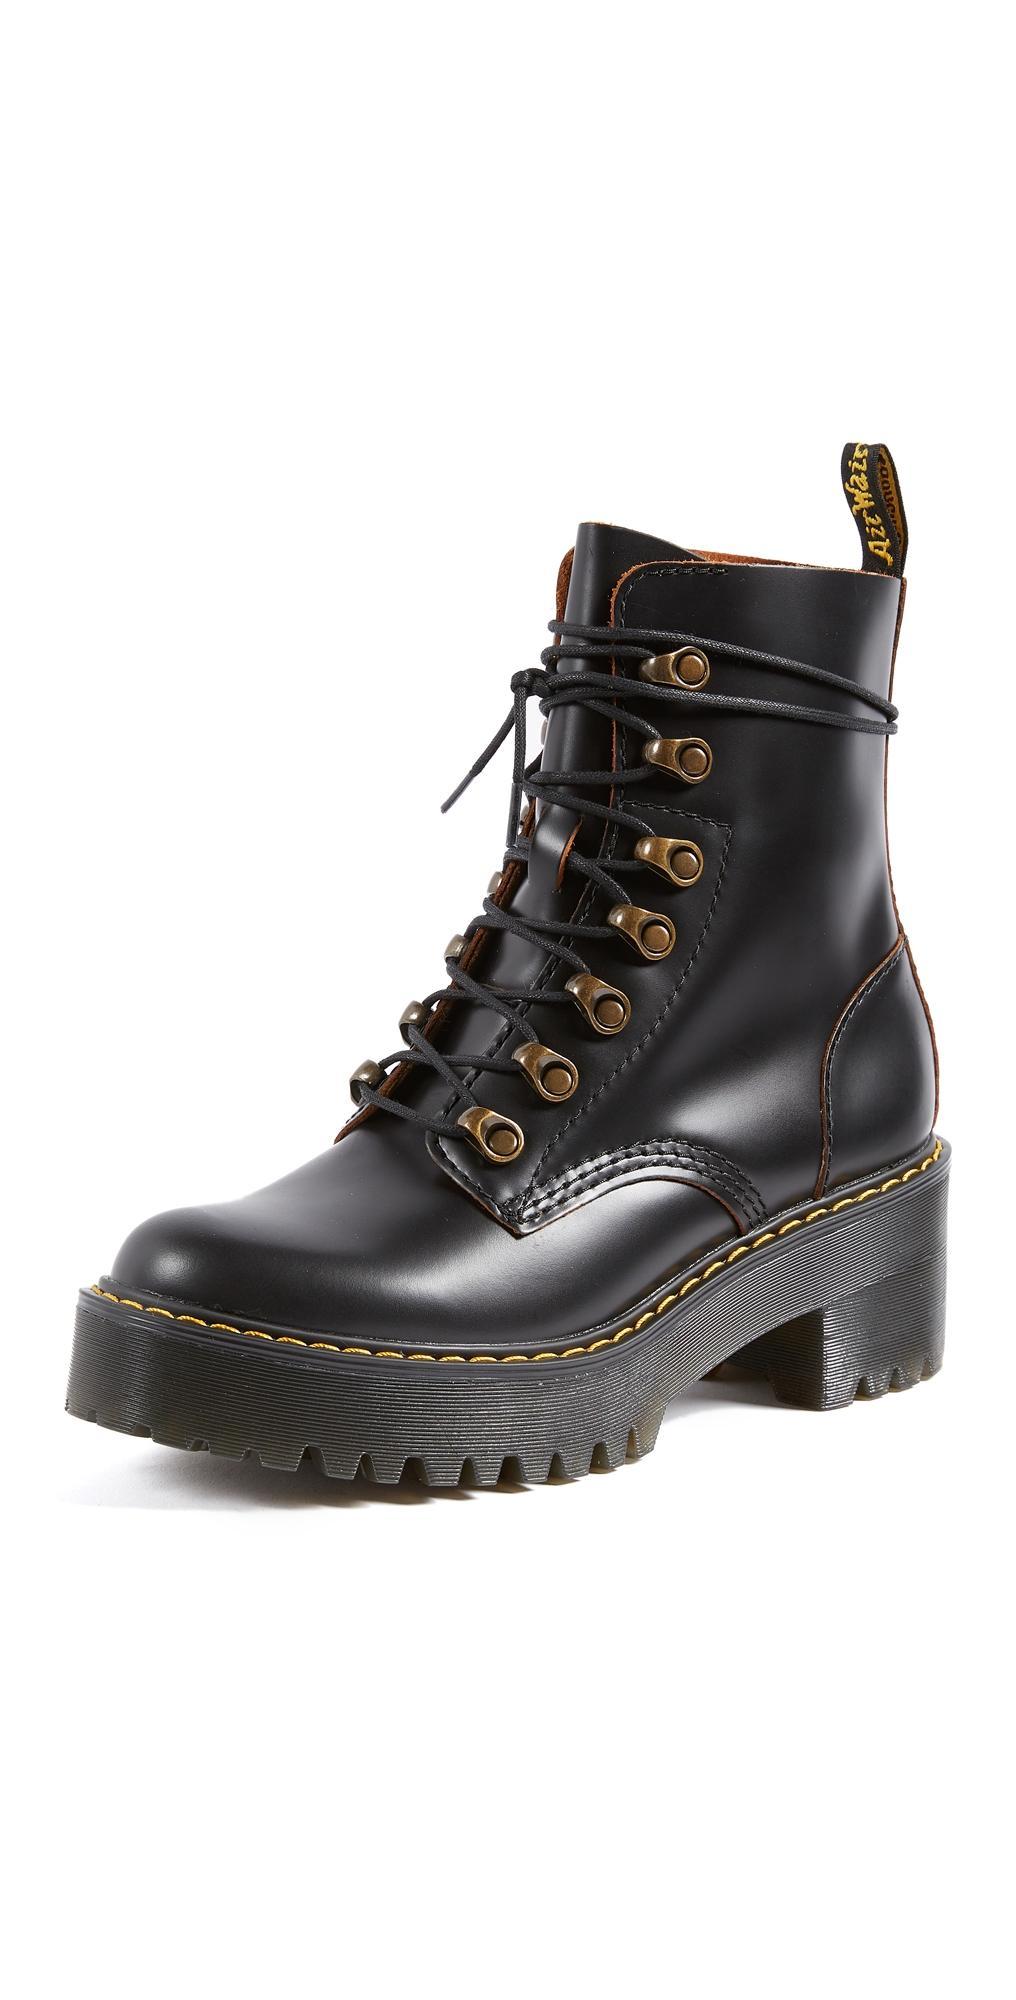 Dr. Martens Leona Heeled Boot Product Image